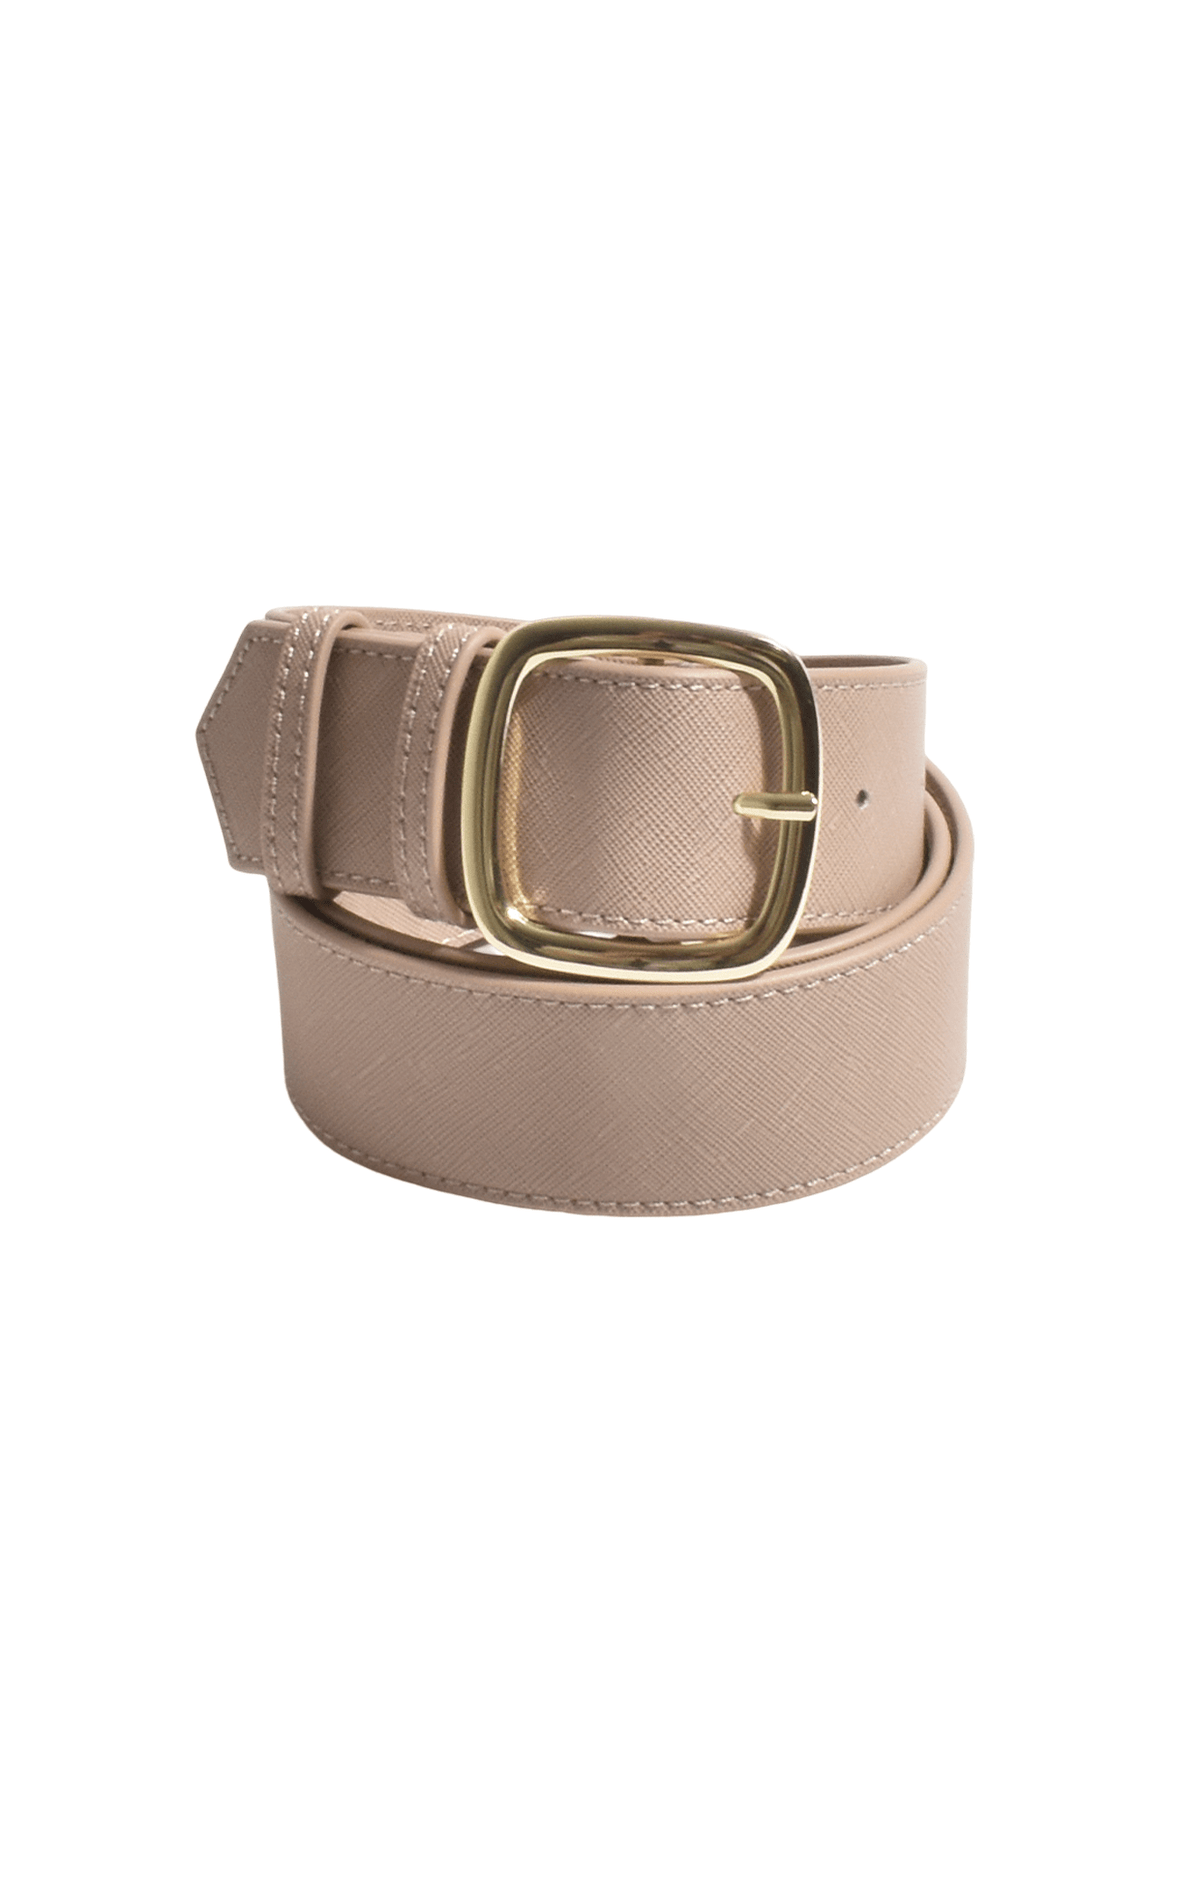 Belts OS / CAMEL JADE TEXTURED SQUARE BUCKLE BELT IN TAUPE